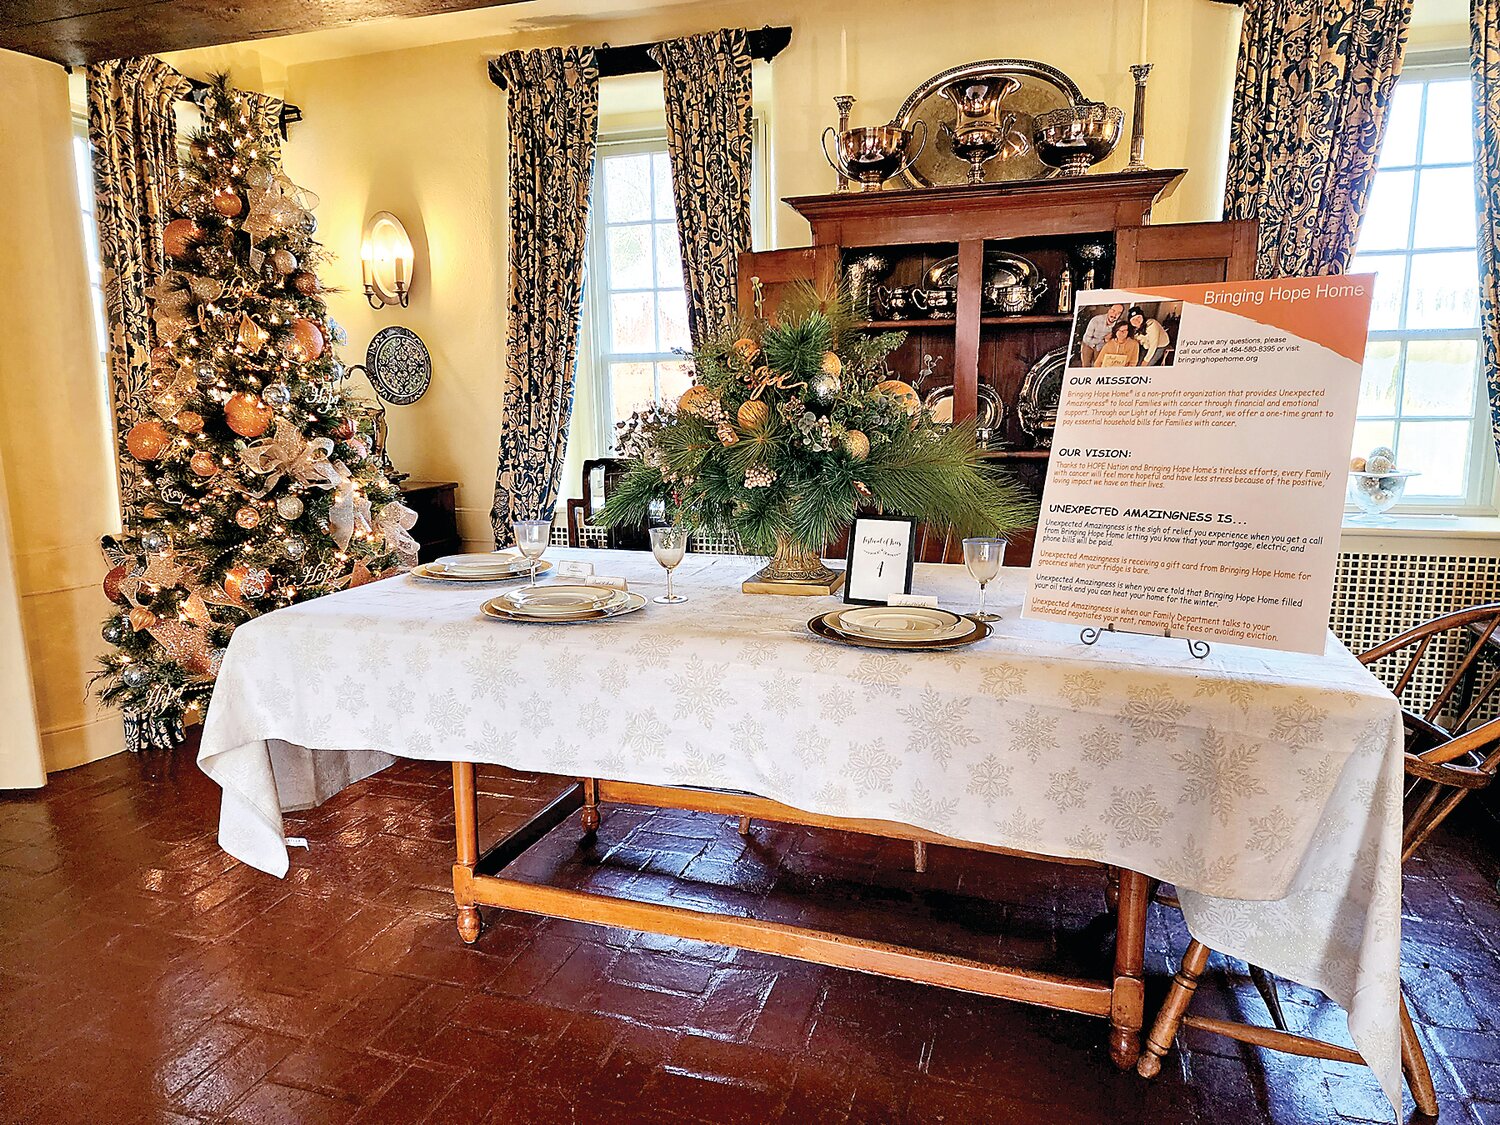 This dining room display is by Bringing Hope Home.